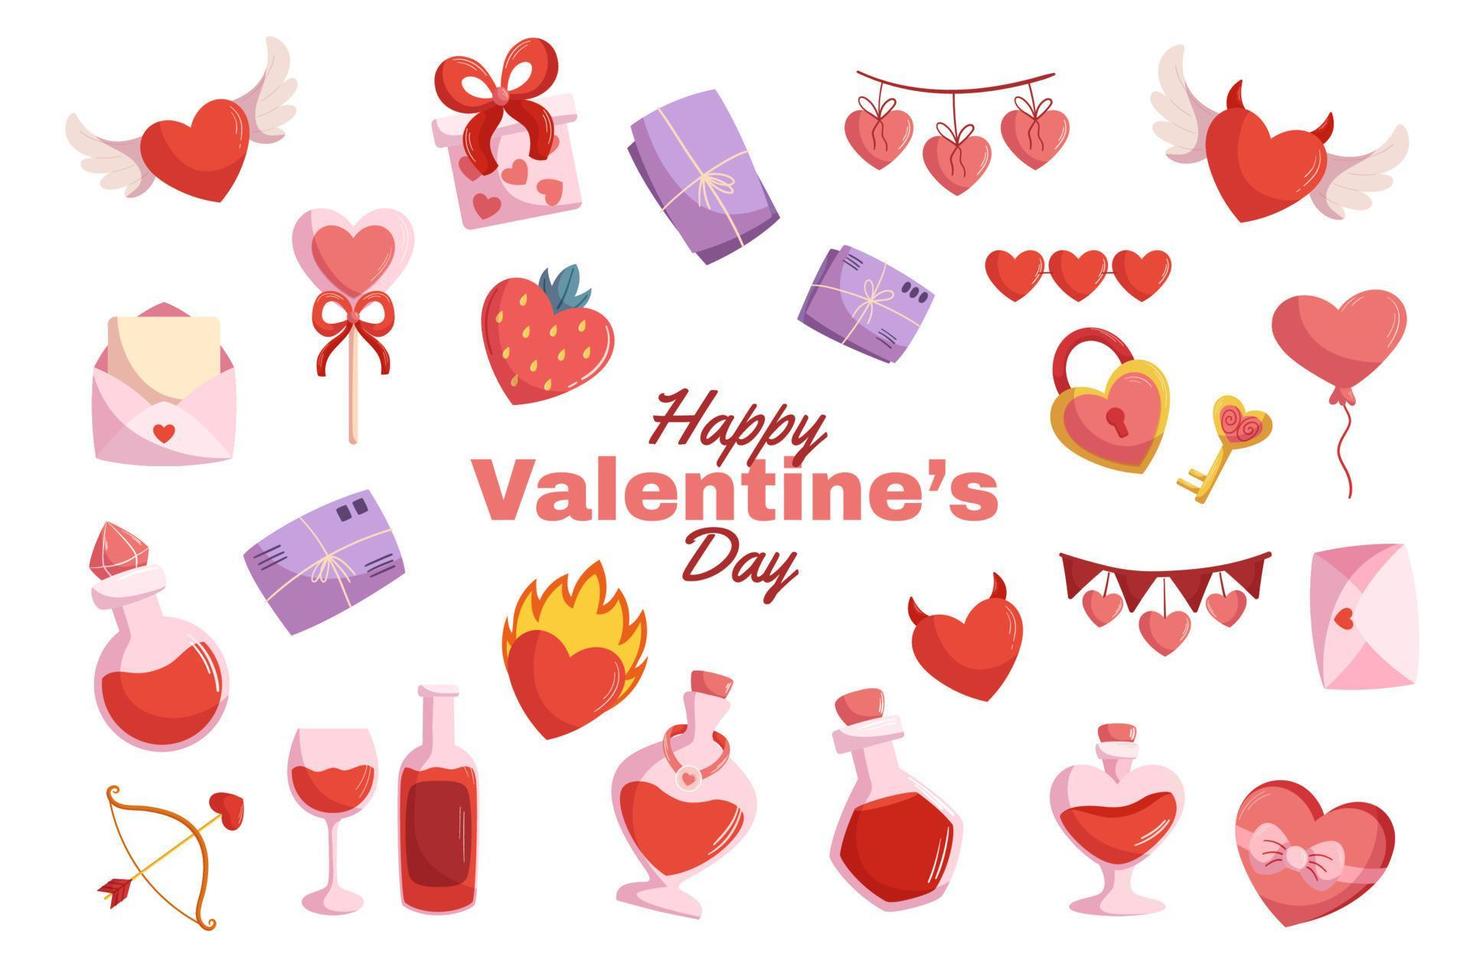 Valentines day big collection with festive elements - love potion bottles, different hearts with wing flame, letters and envelop. Vector cartoon style illustration